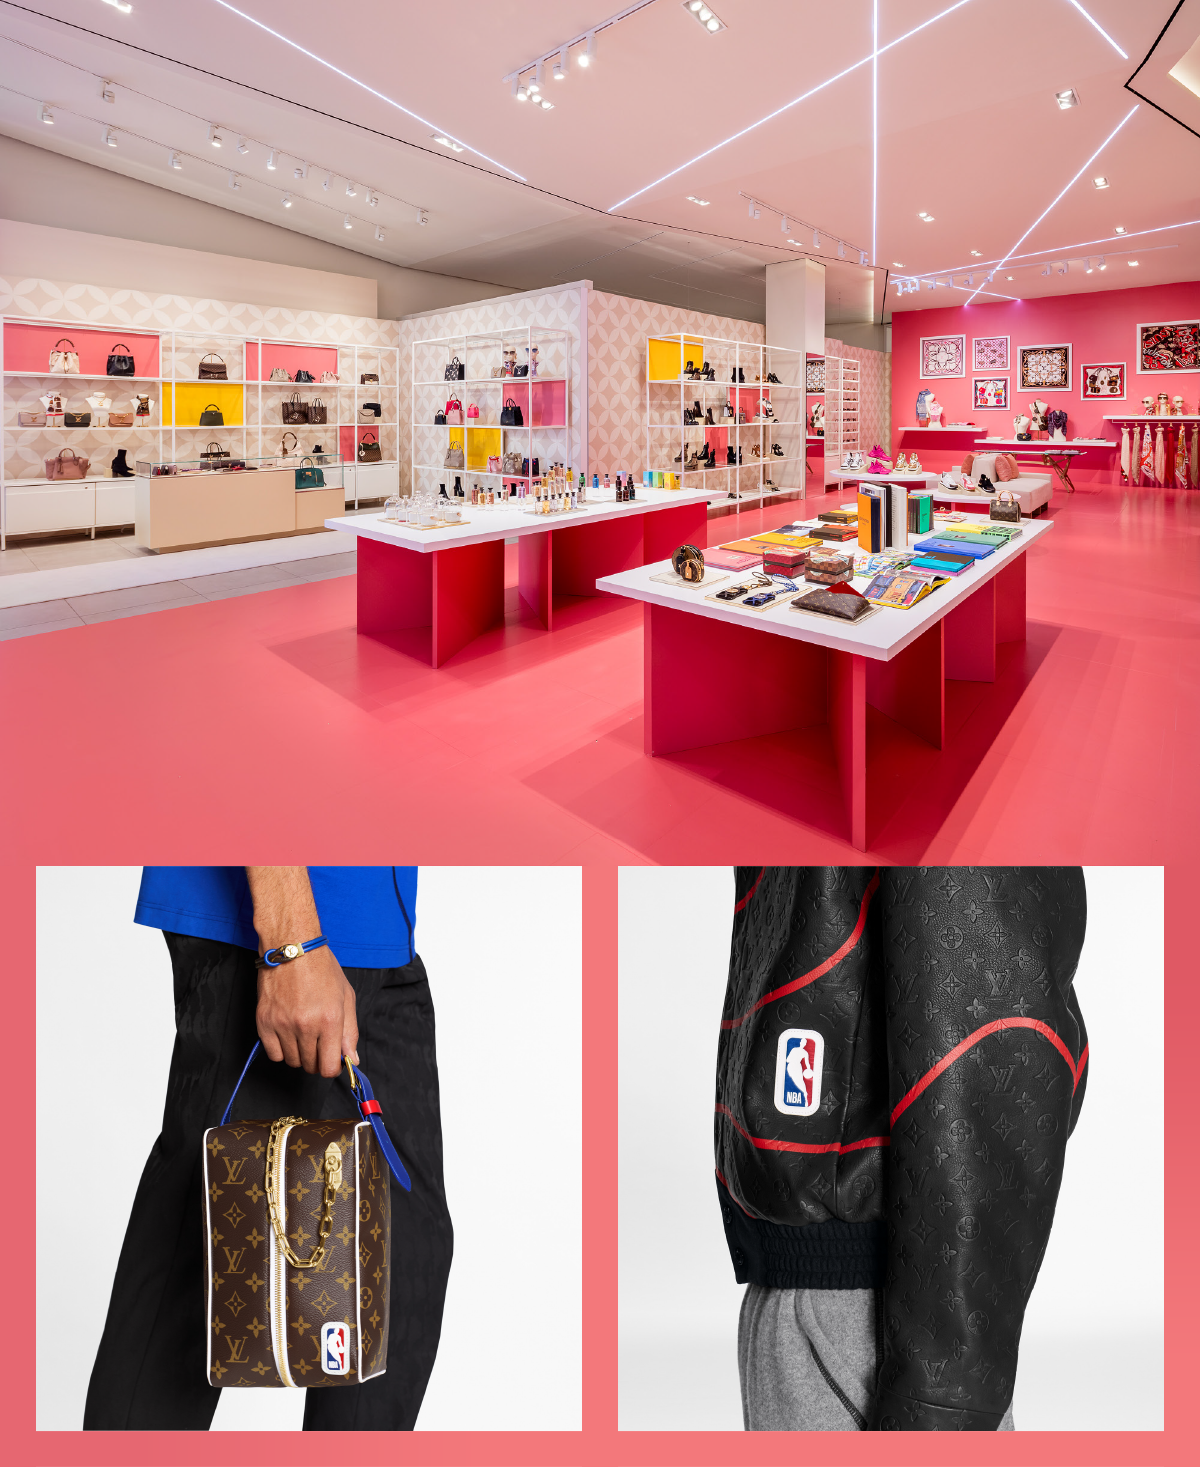 Louis Vuitton goes courtside with LVxNBA capsule collection